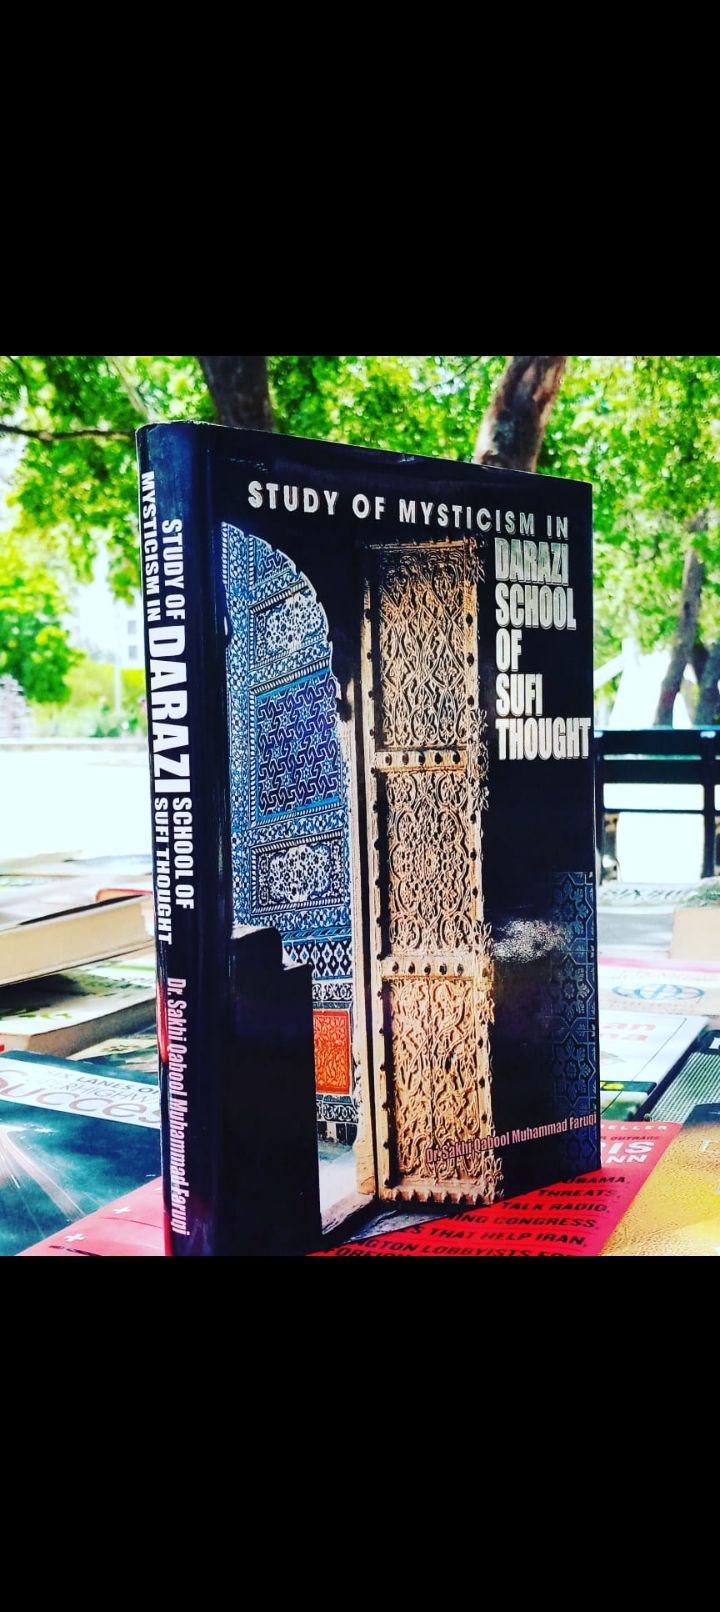 study of mysticism in darazi school of sufi thought by dr.sakhi. original hardcover see